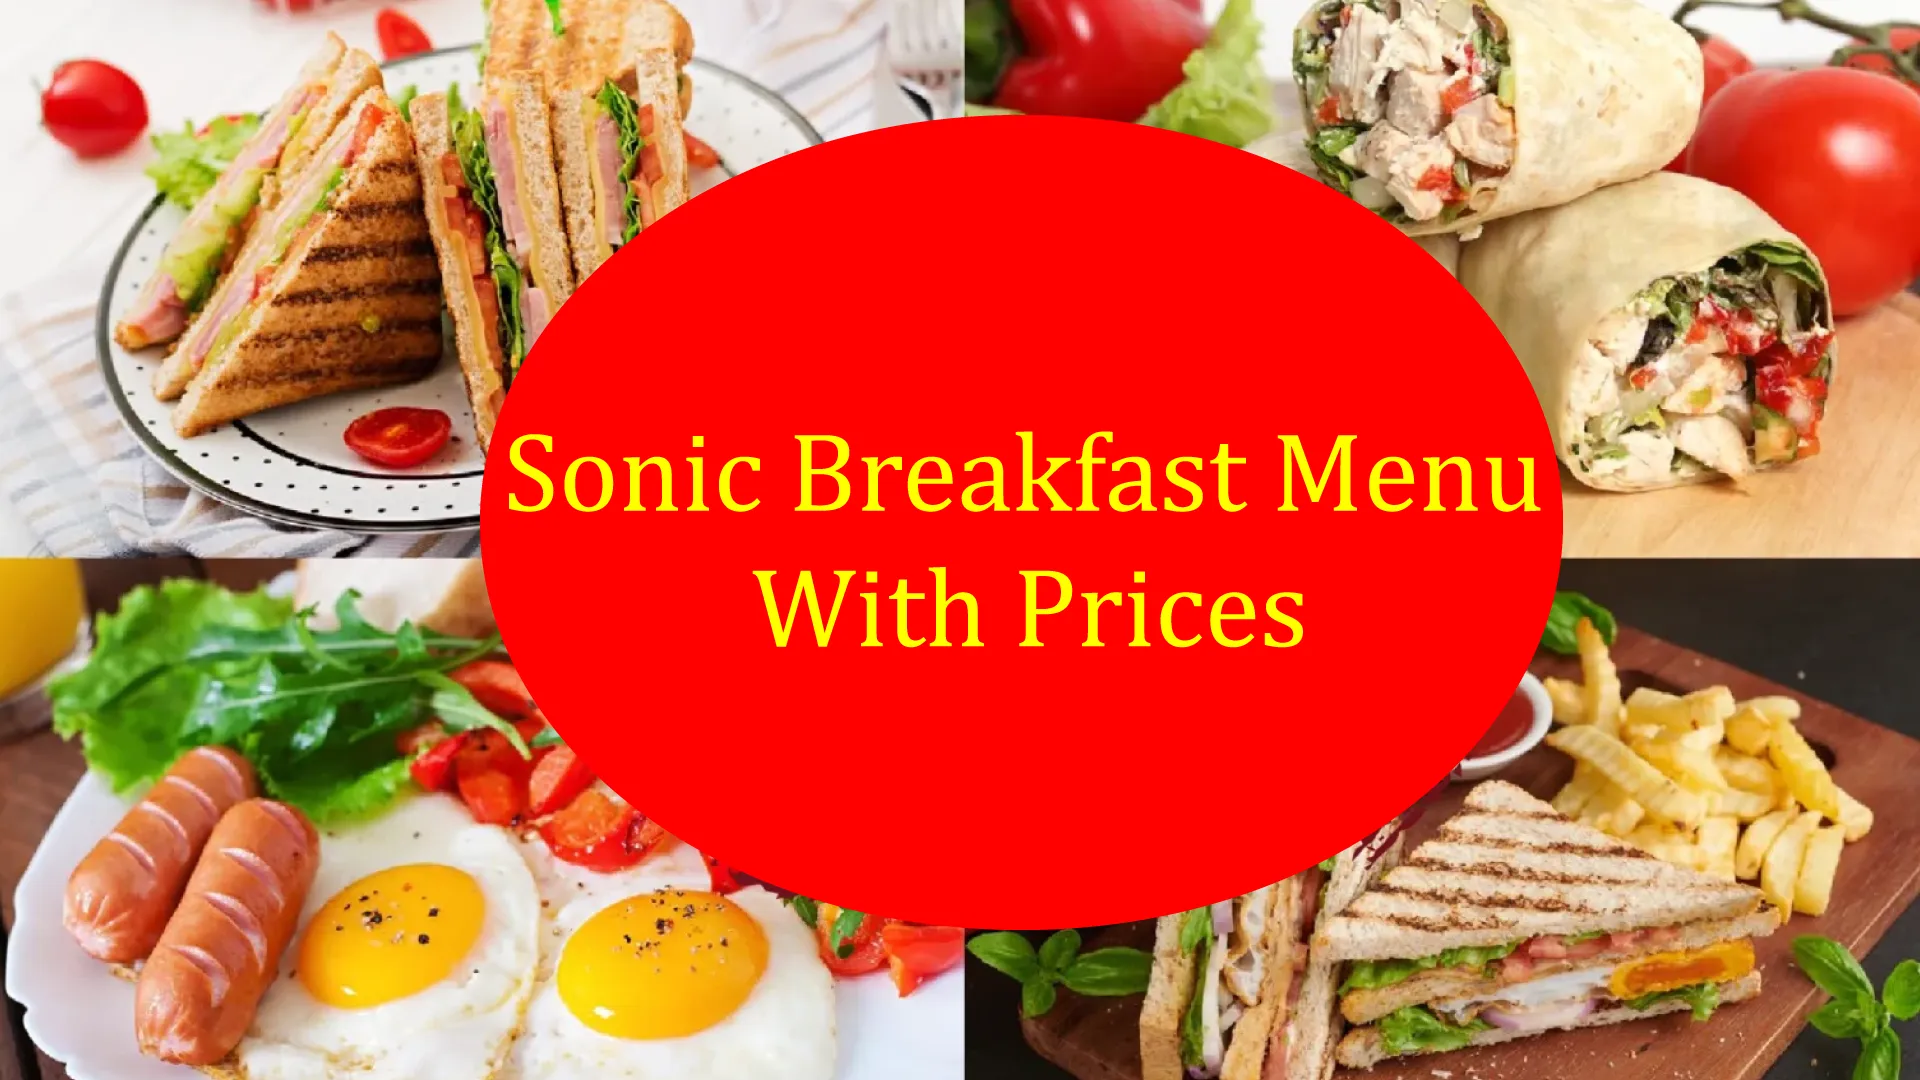 Sonic Breakfast Menu With Prices